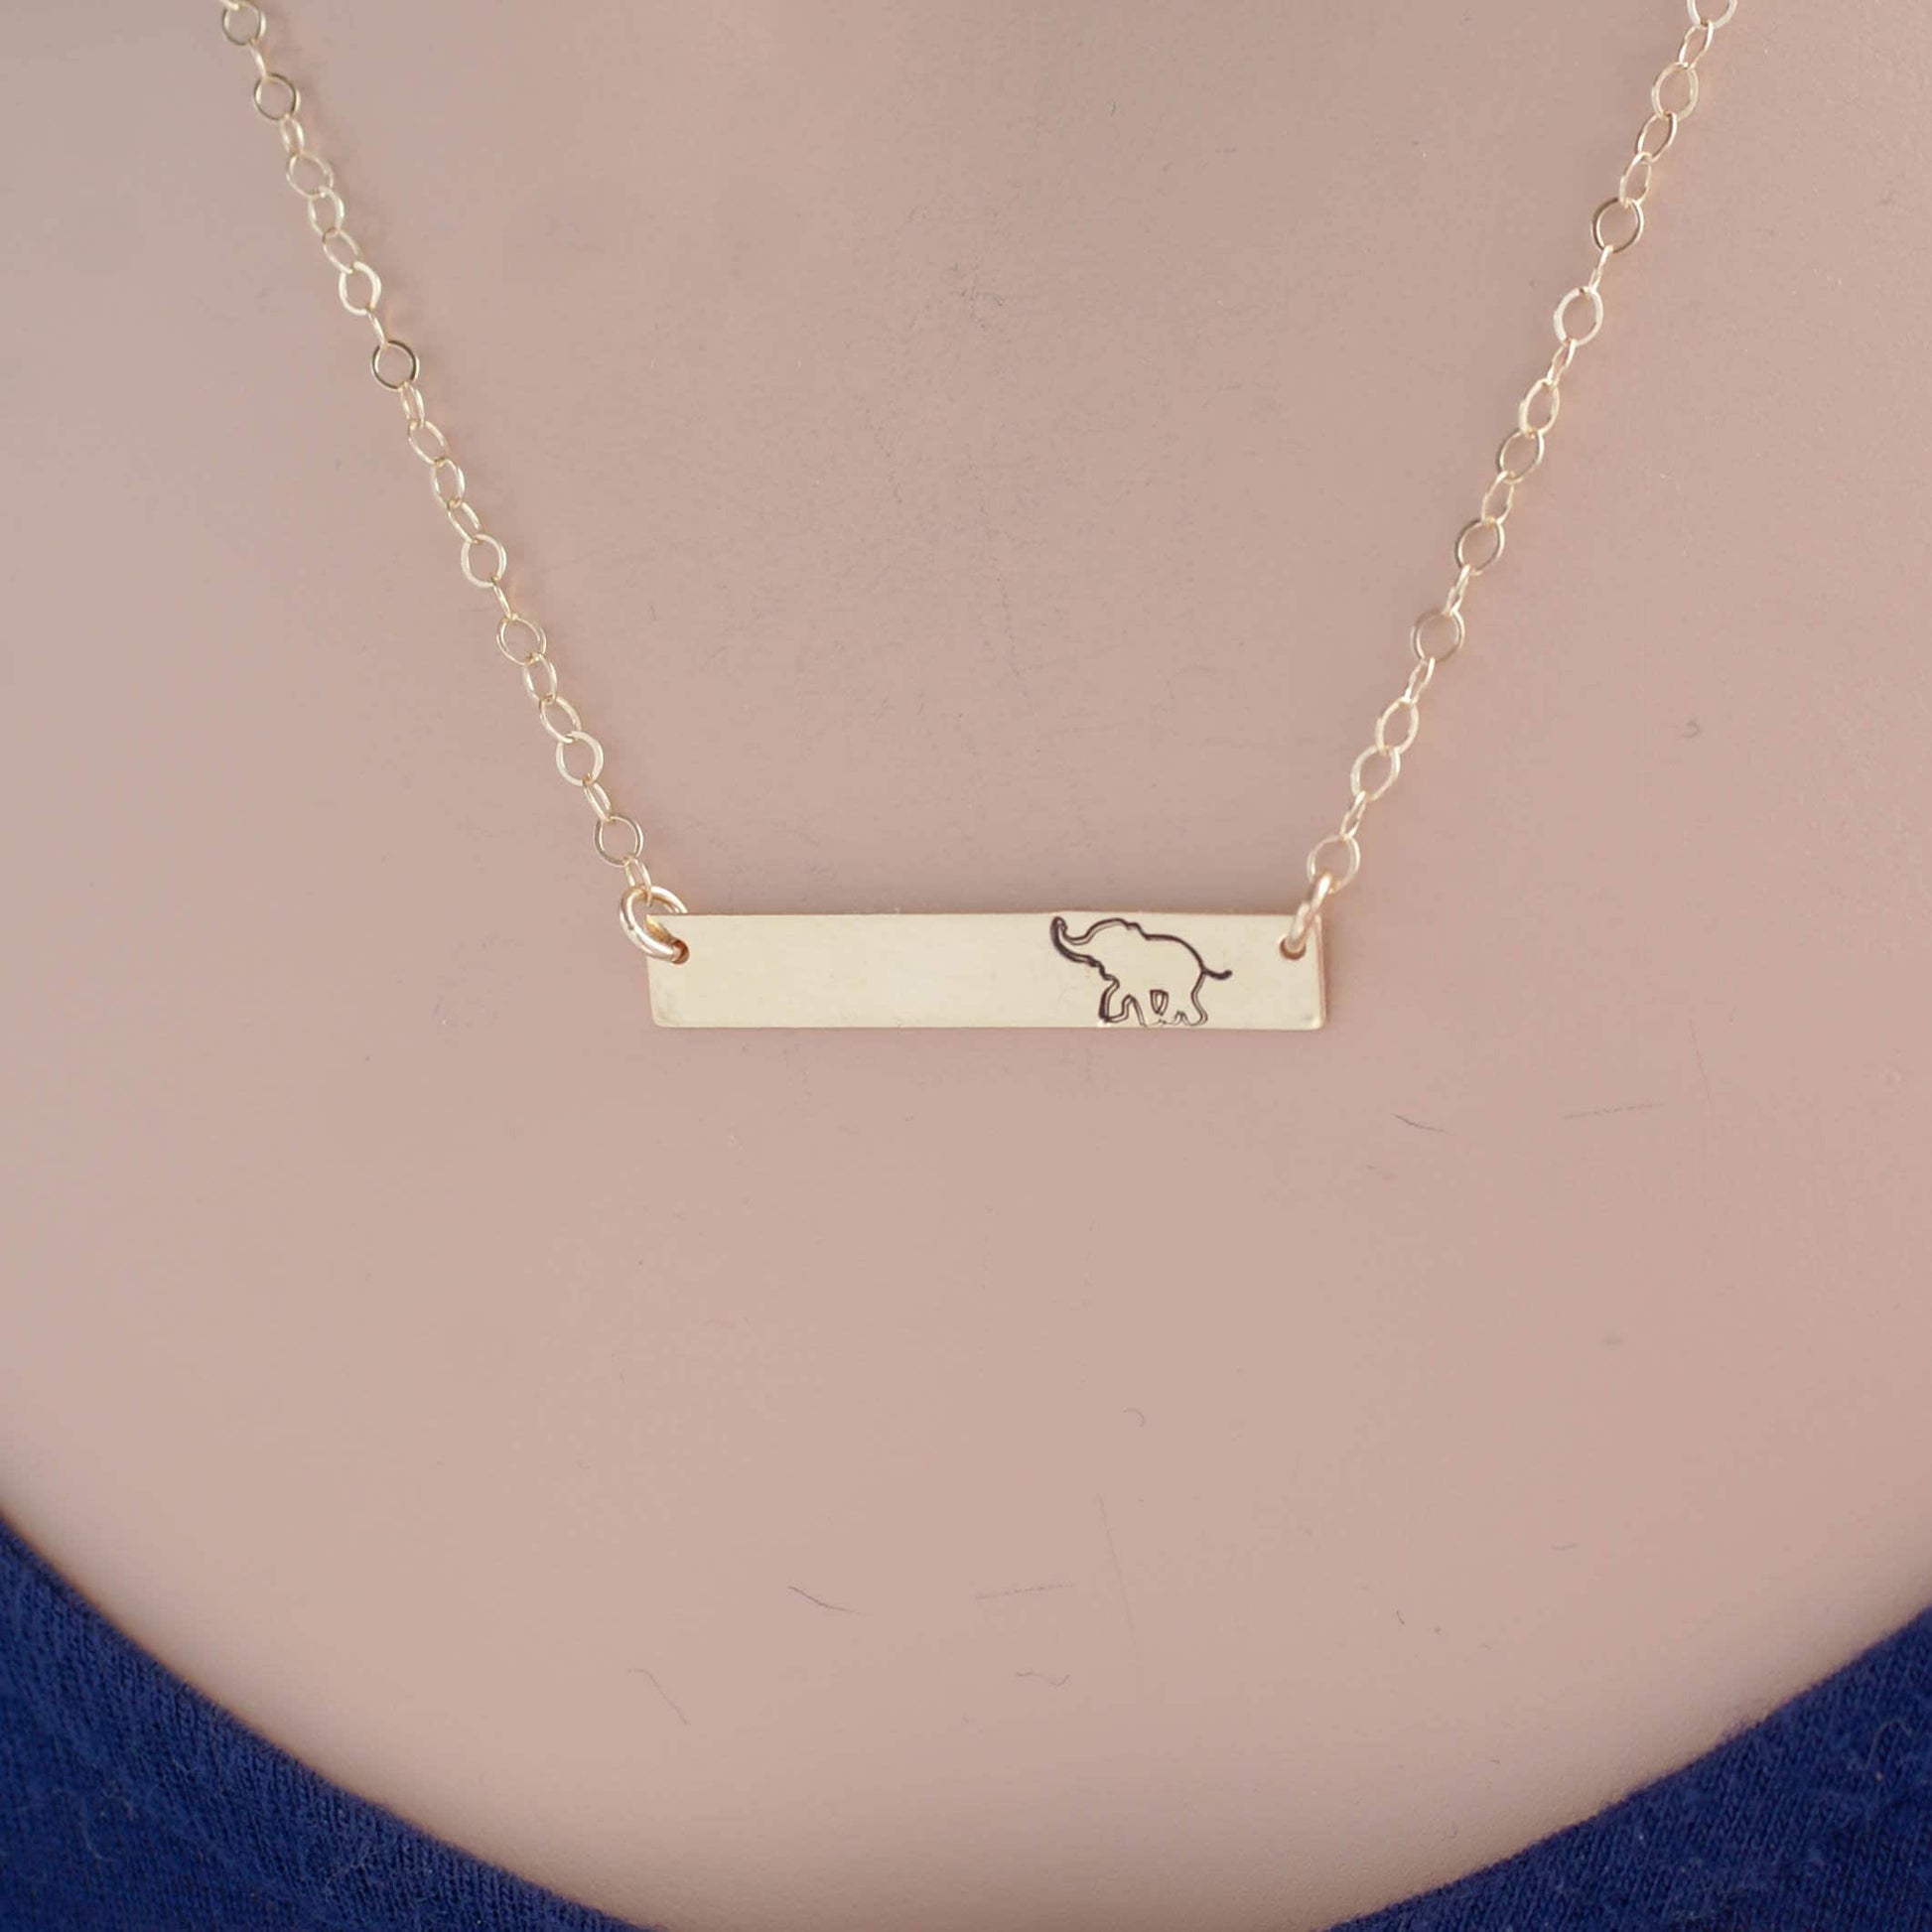 Gold bar neckalce stamped with elephant on necklace